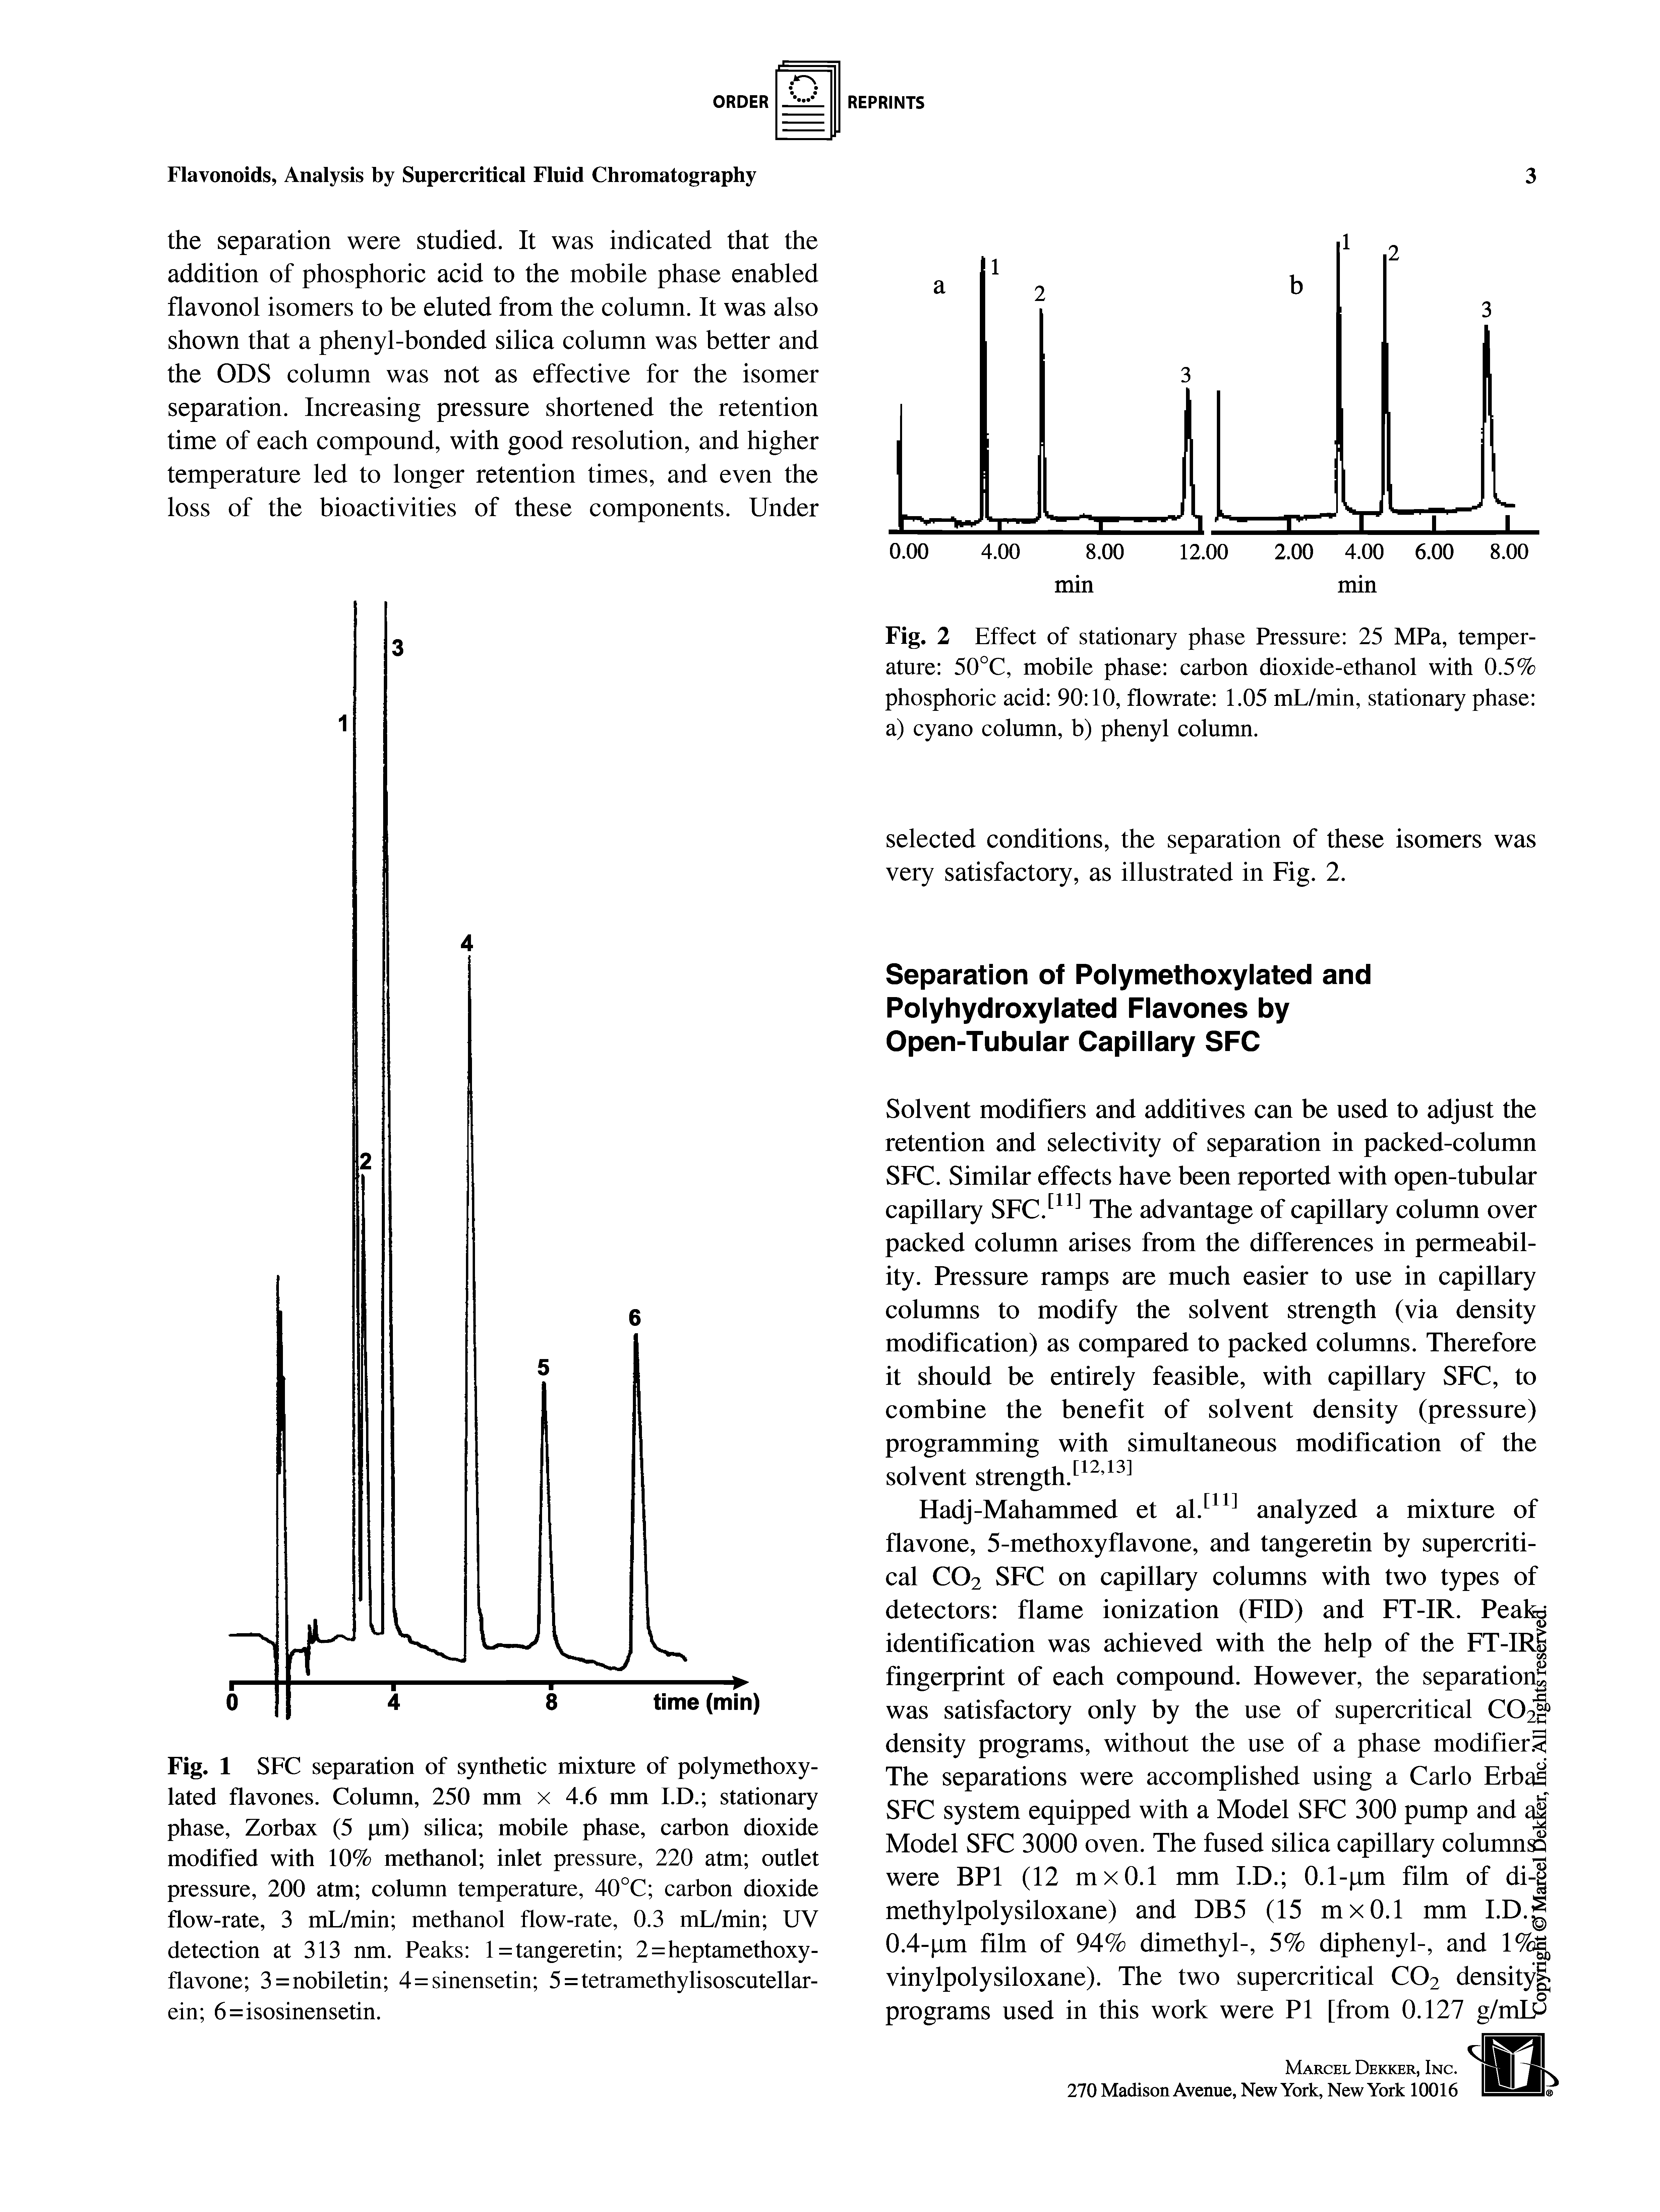 Fig. 2 Effect of stationary phase Pressure 25 MPa, temperature 50°C, mobile phase carbon dioxide-ethanol with 0.5% phosphoric acid 90 10, flowrate 1.05 mL/min, stationary phase a) cyano column, b) phenyl column.